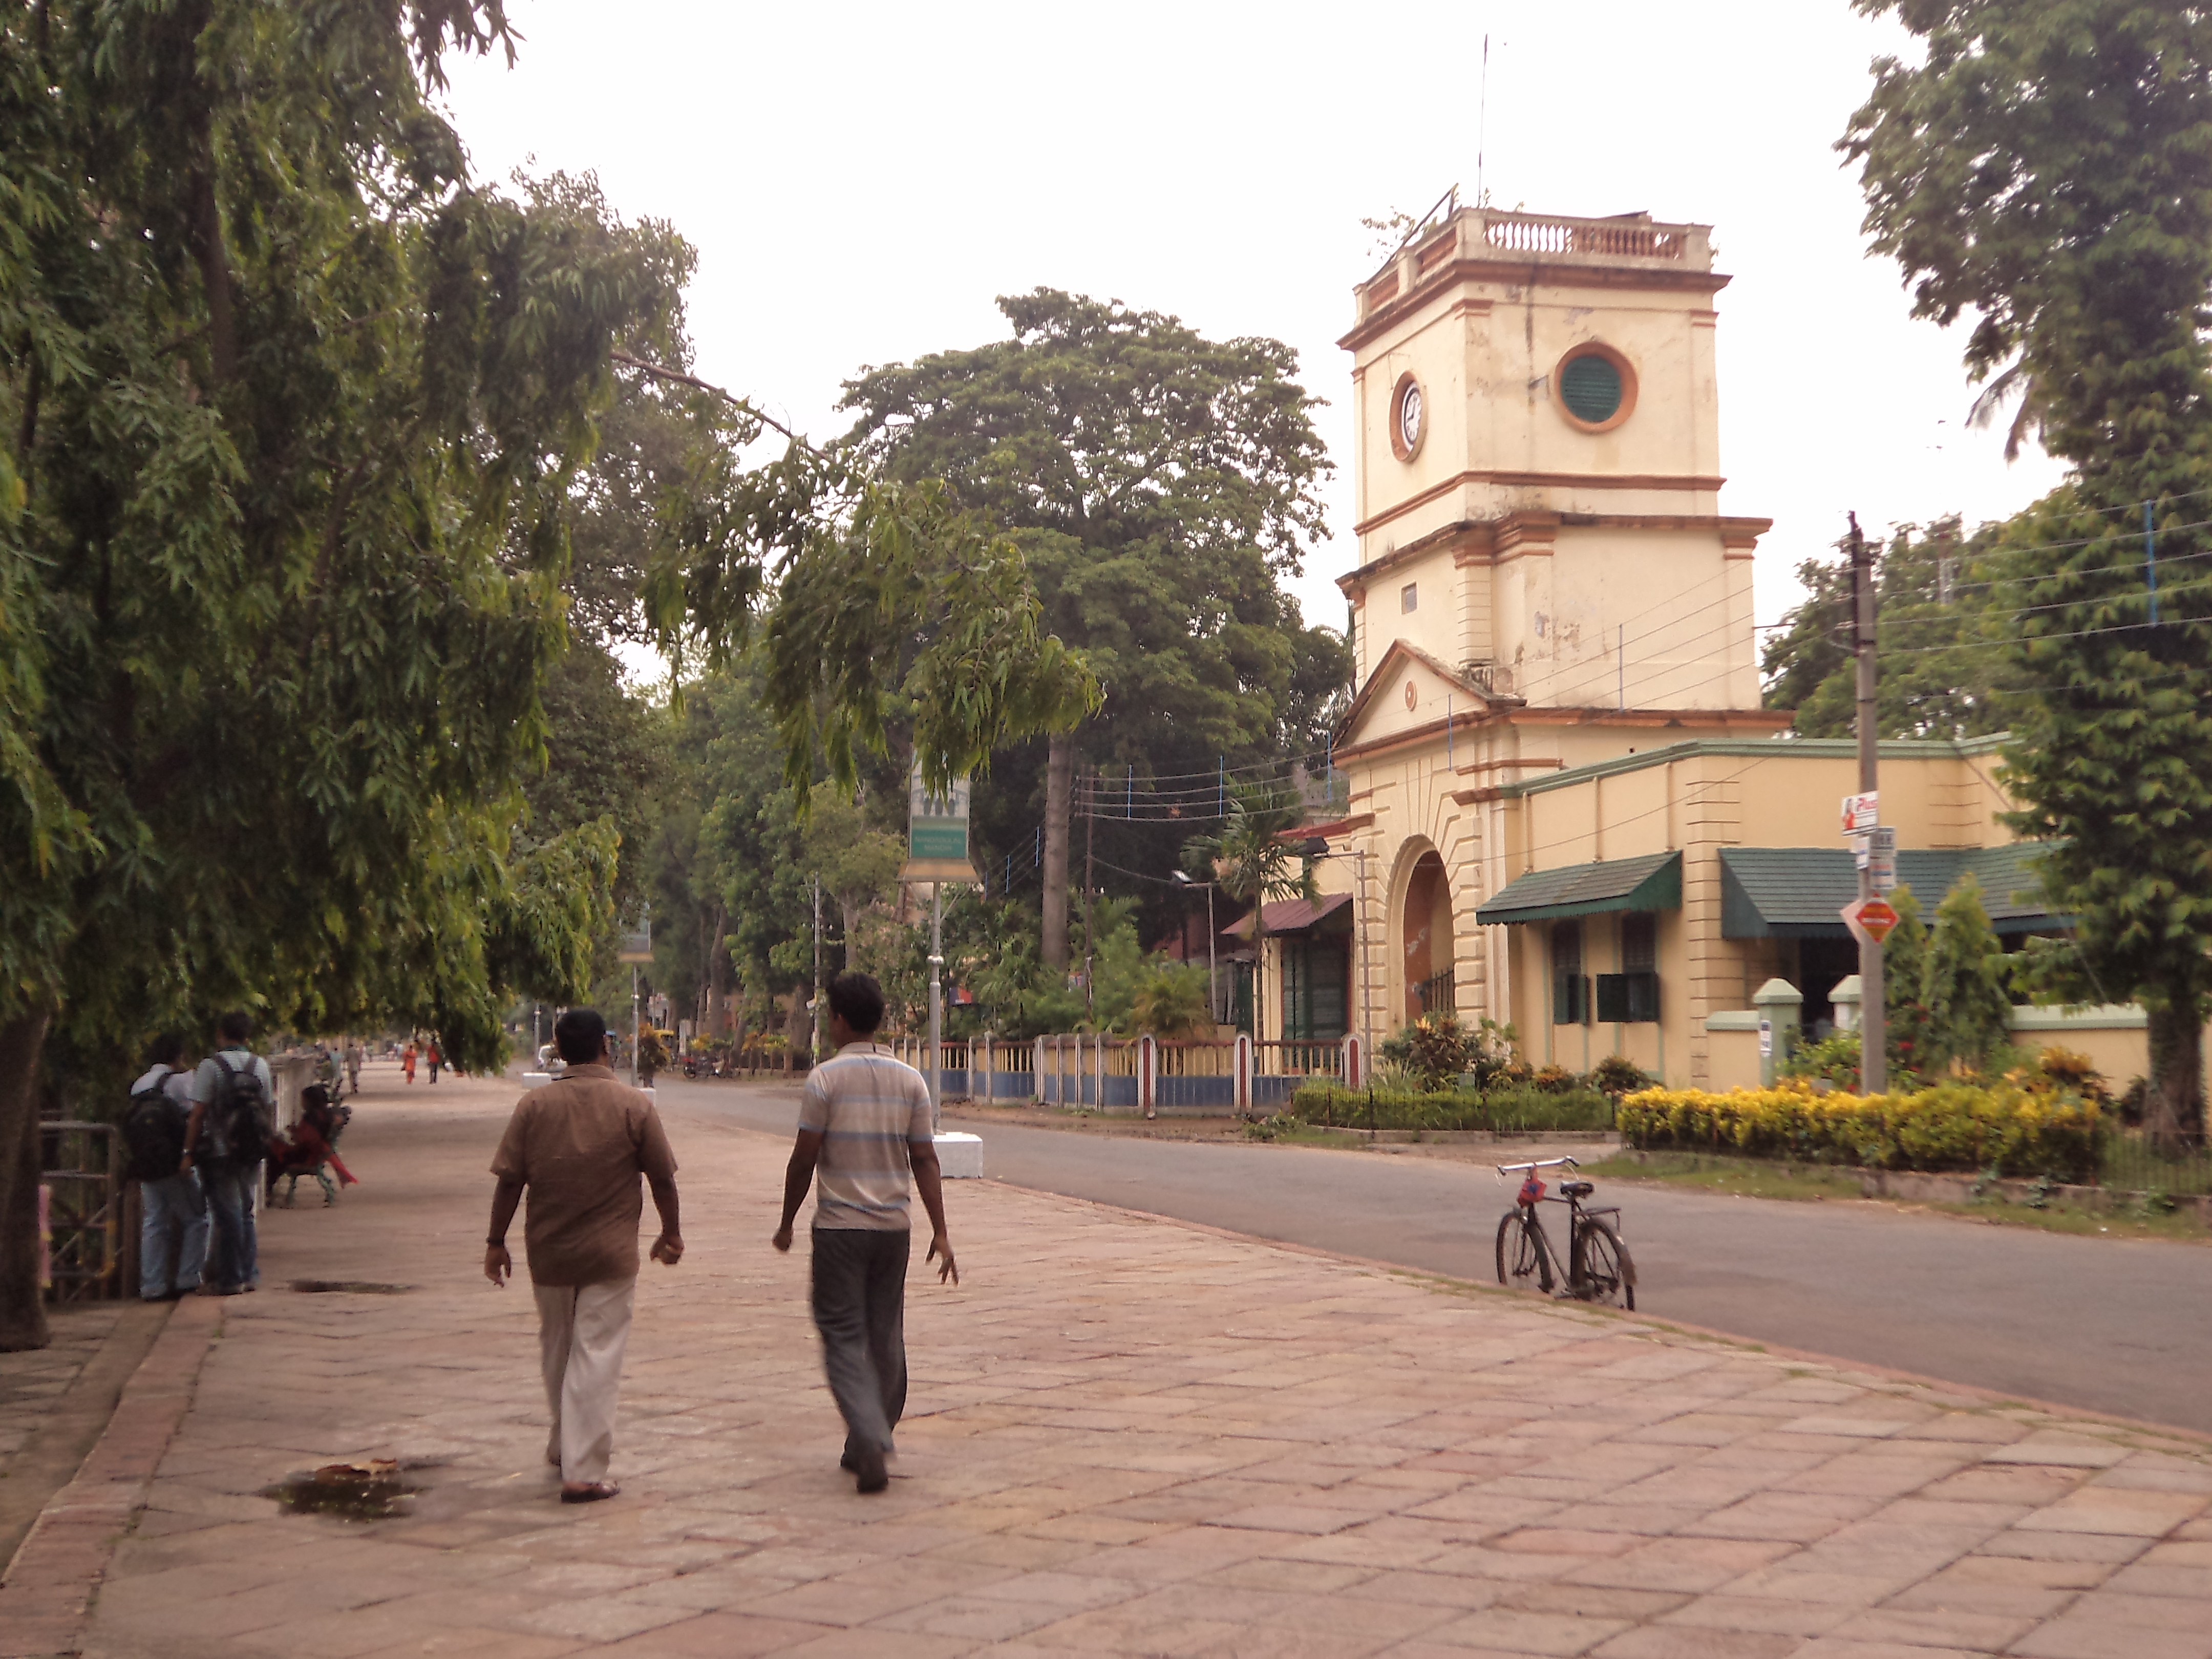 French Colonial Town of Chandernagore, West Bengal